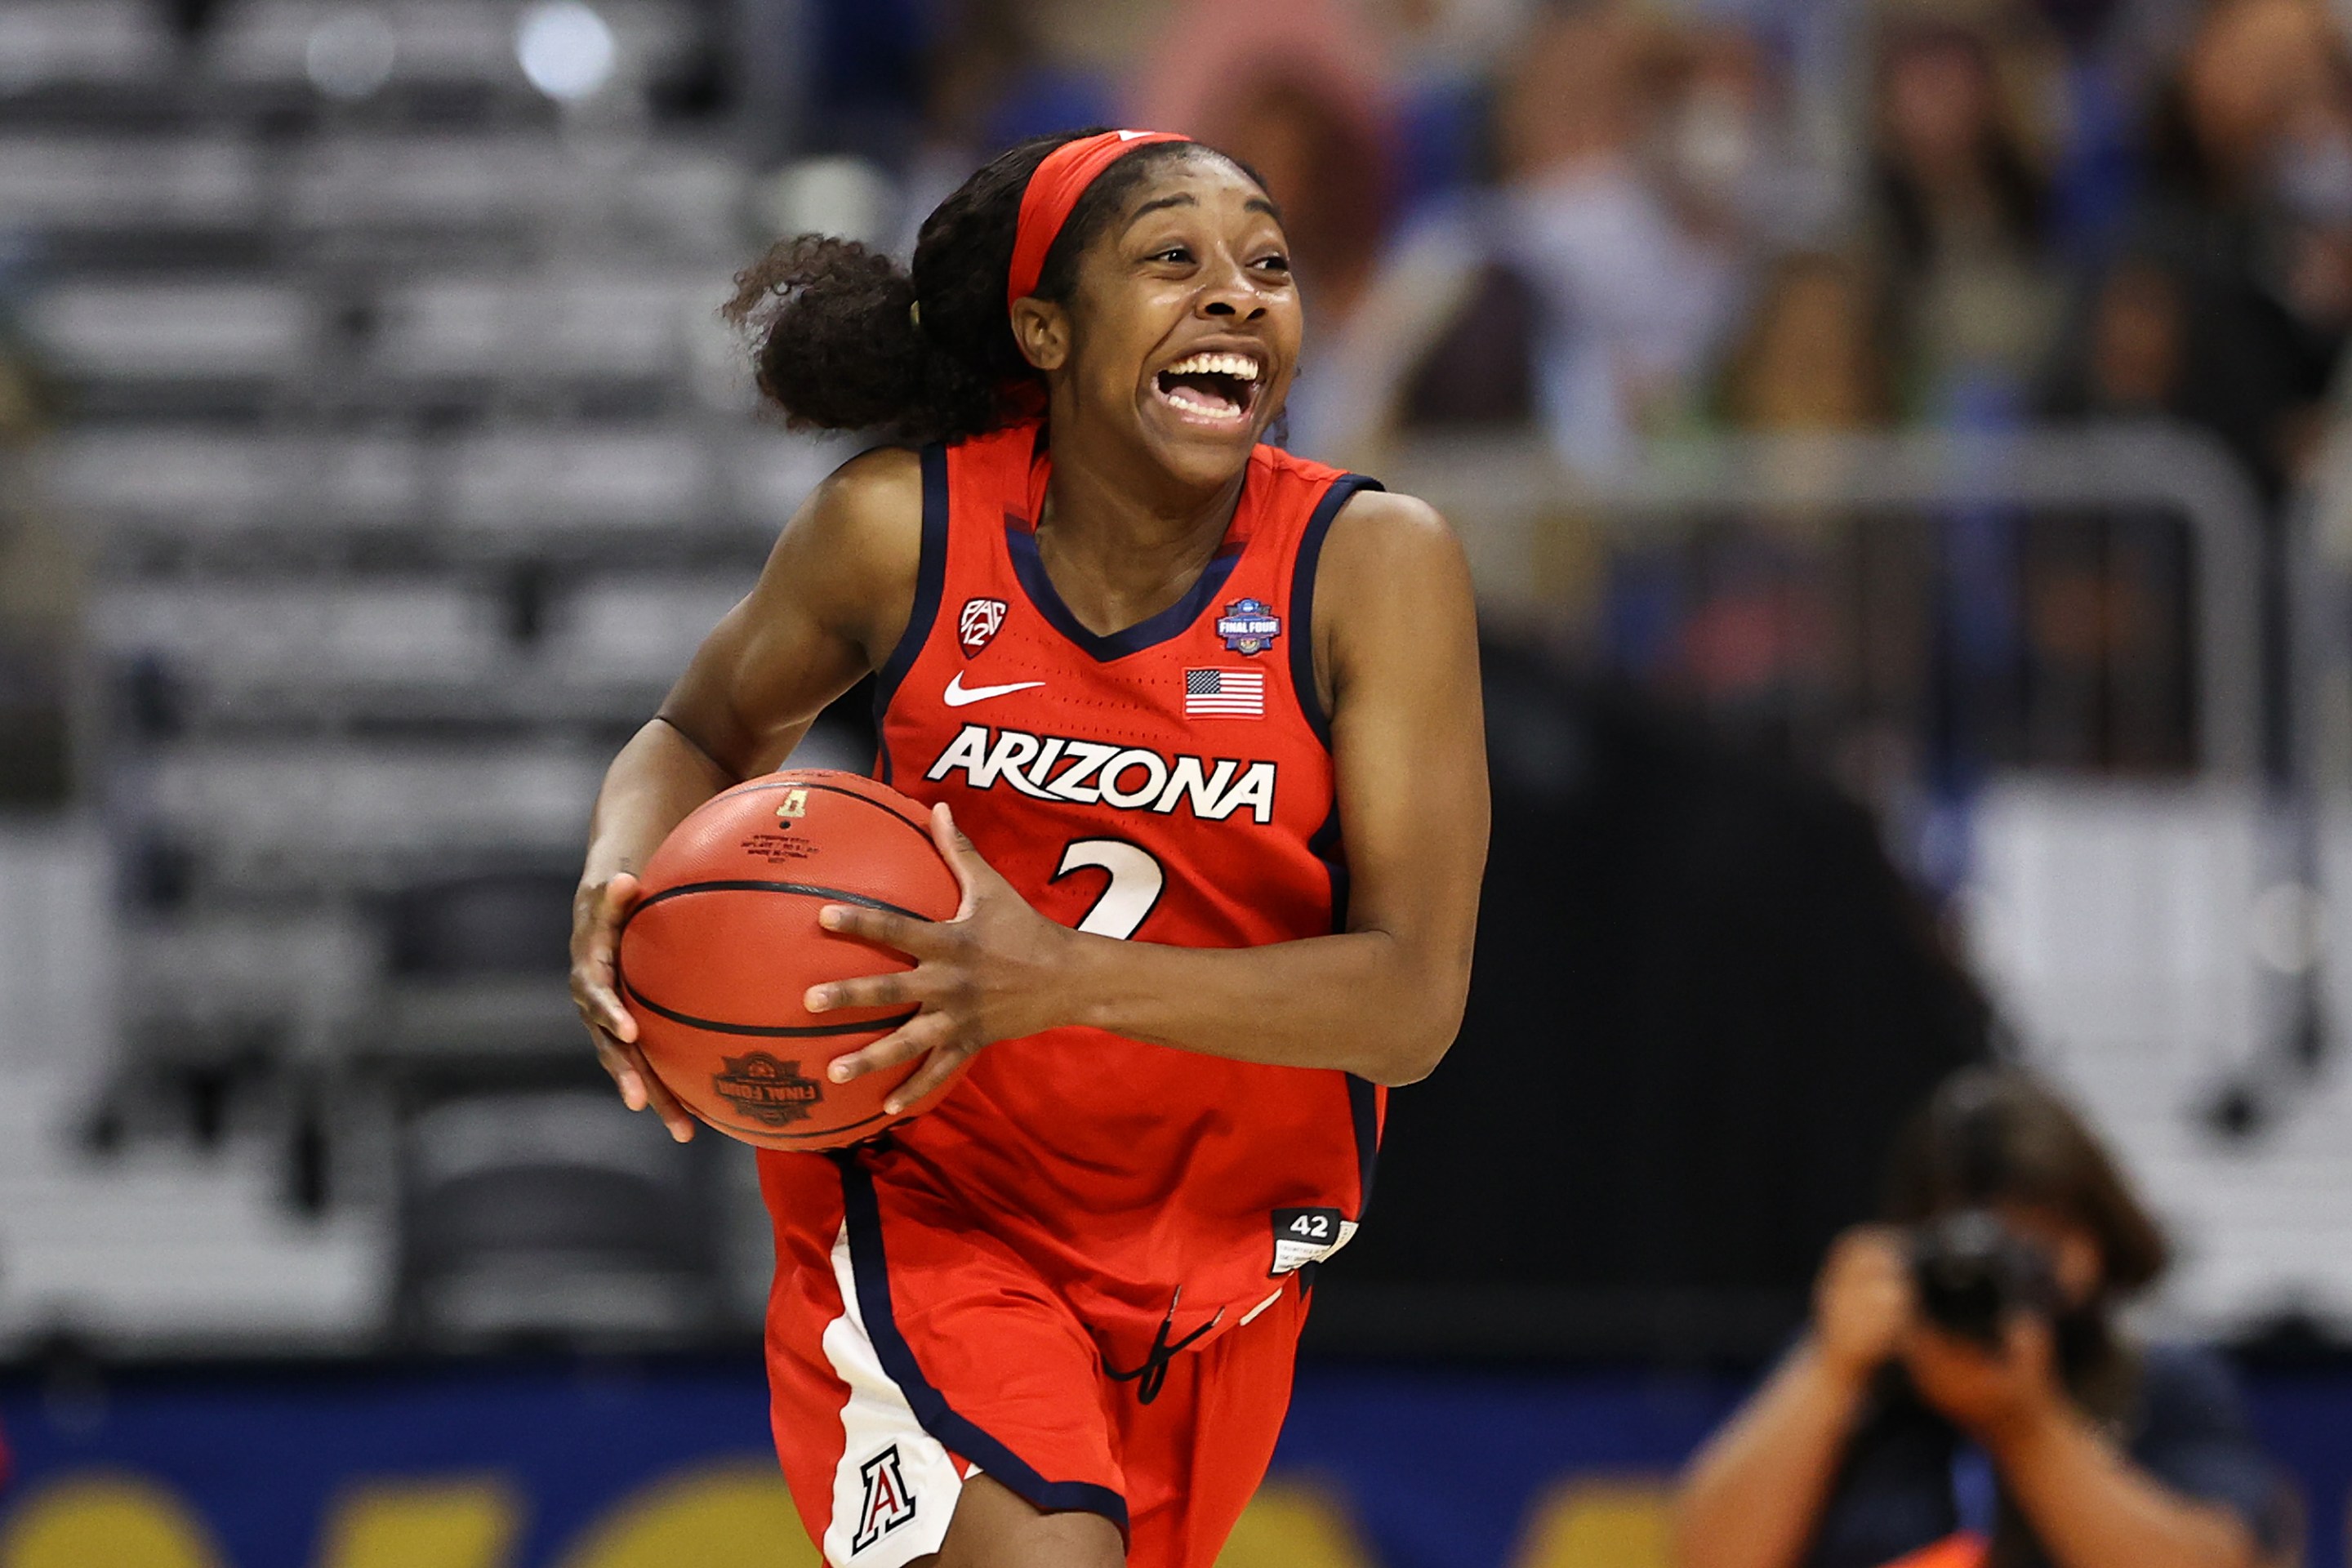 Aari McDonald #2 of the Arizona Wildcats celebrates after defeating the UConn Huskies during the third quarter in the Final Four semifinal game of the 2021 NCAA Women's Basketball Tournament at the Alamodome on April 02, 2021 in San Antonio, Texas. (